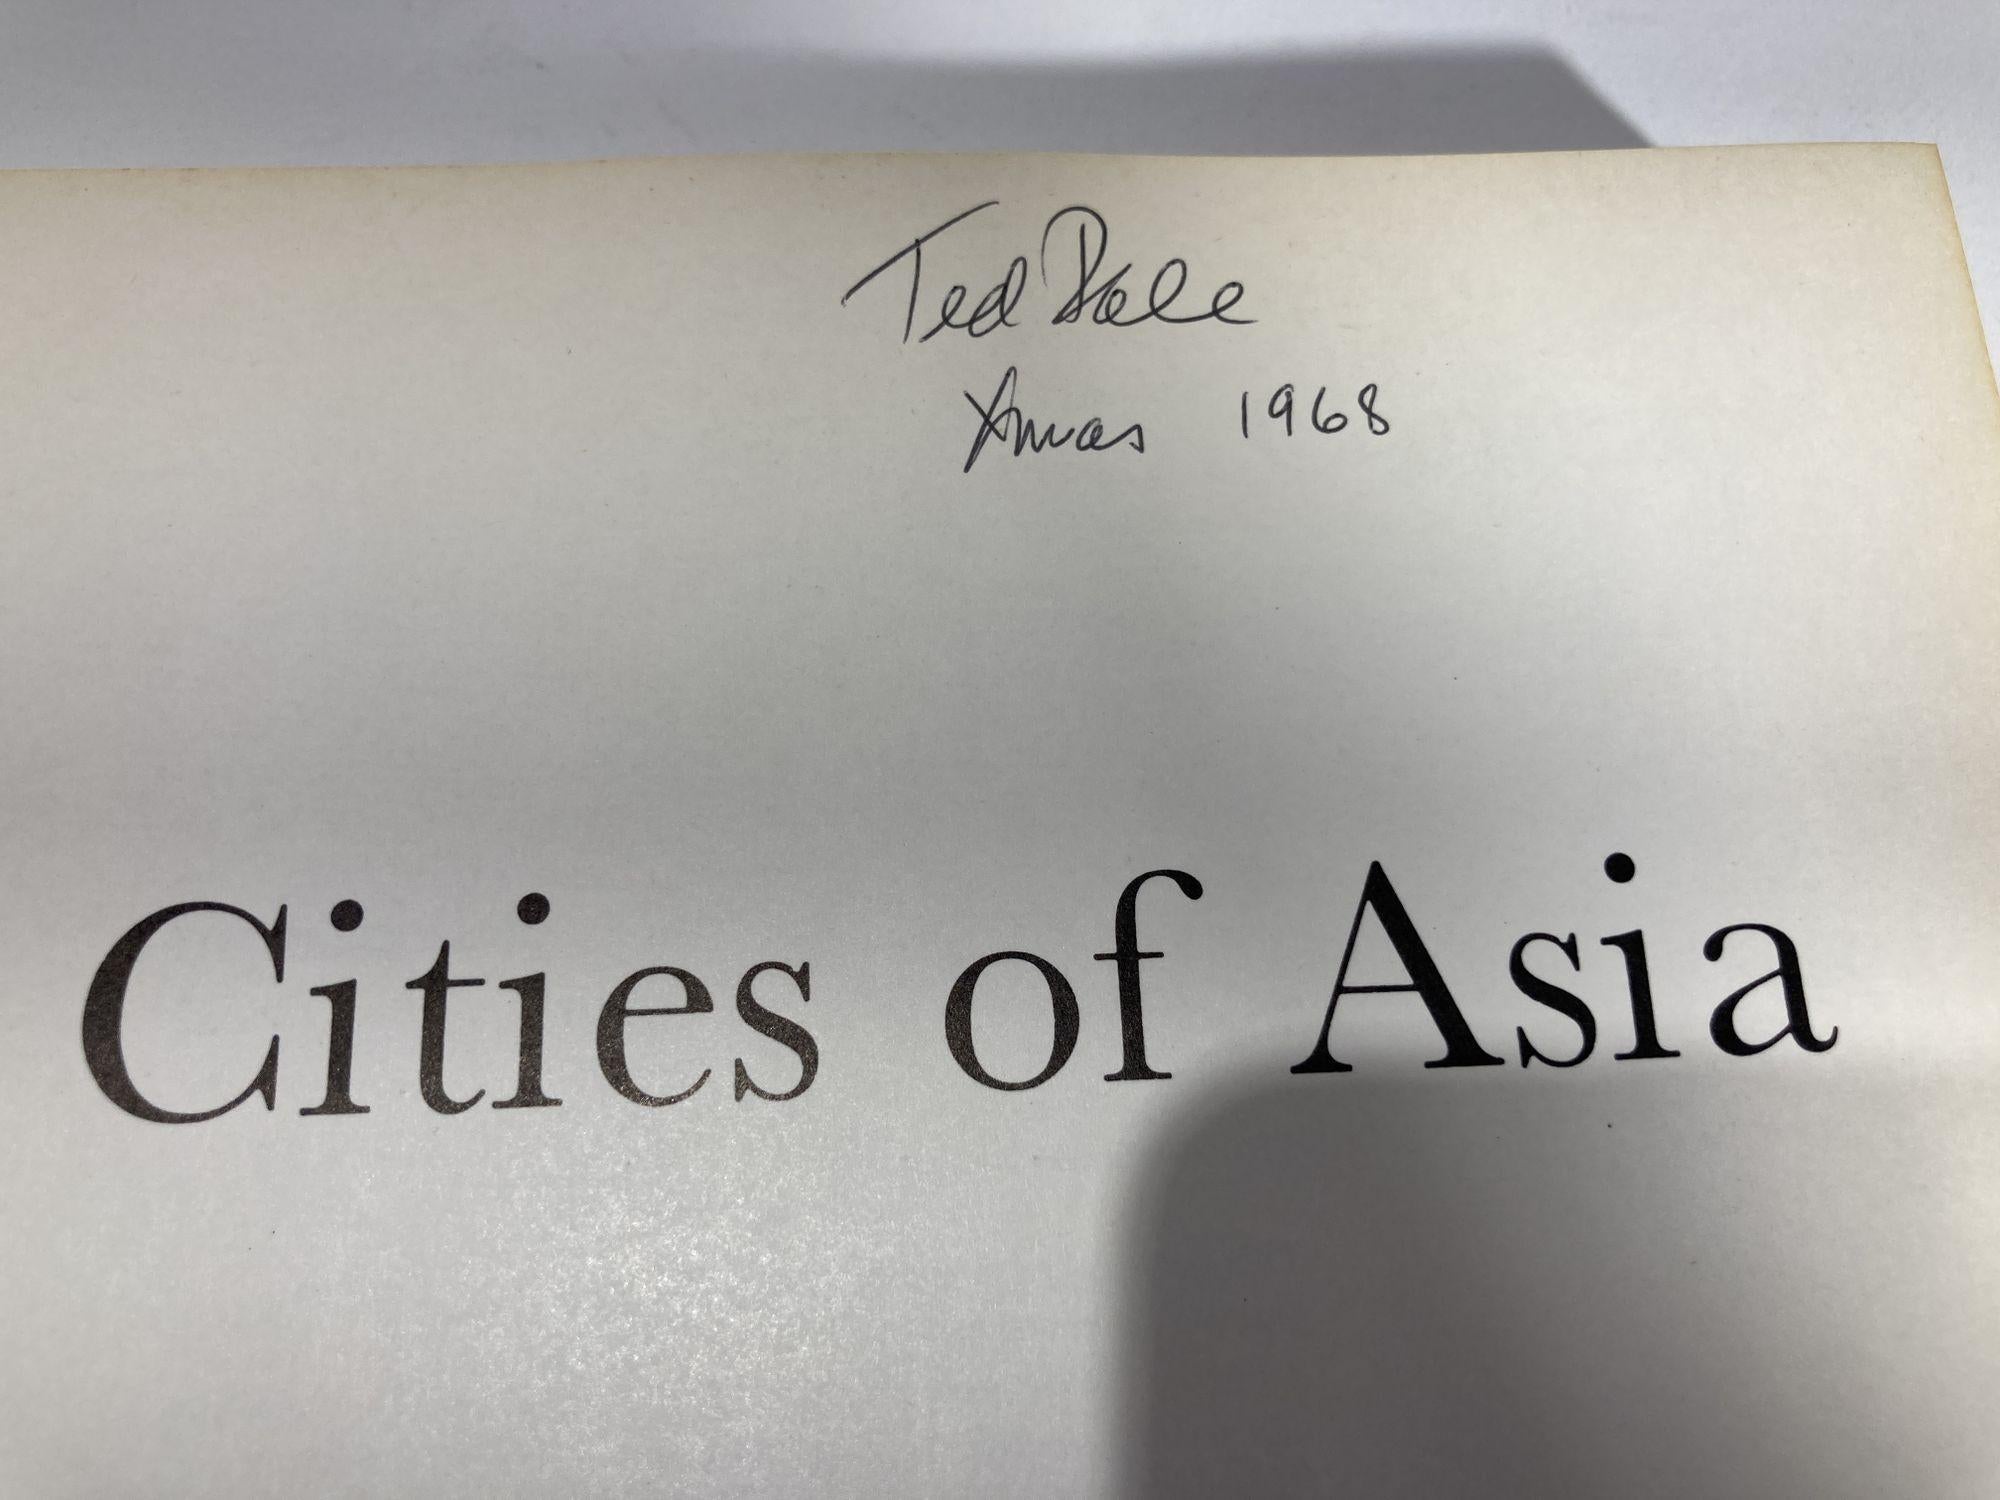 Paper Lost Cities of Asia Hardcover Book 1st Edition 1966 by Wim Swaan For Sale